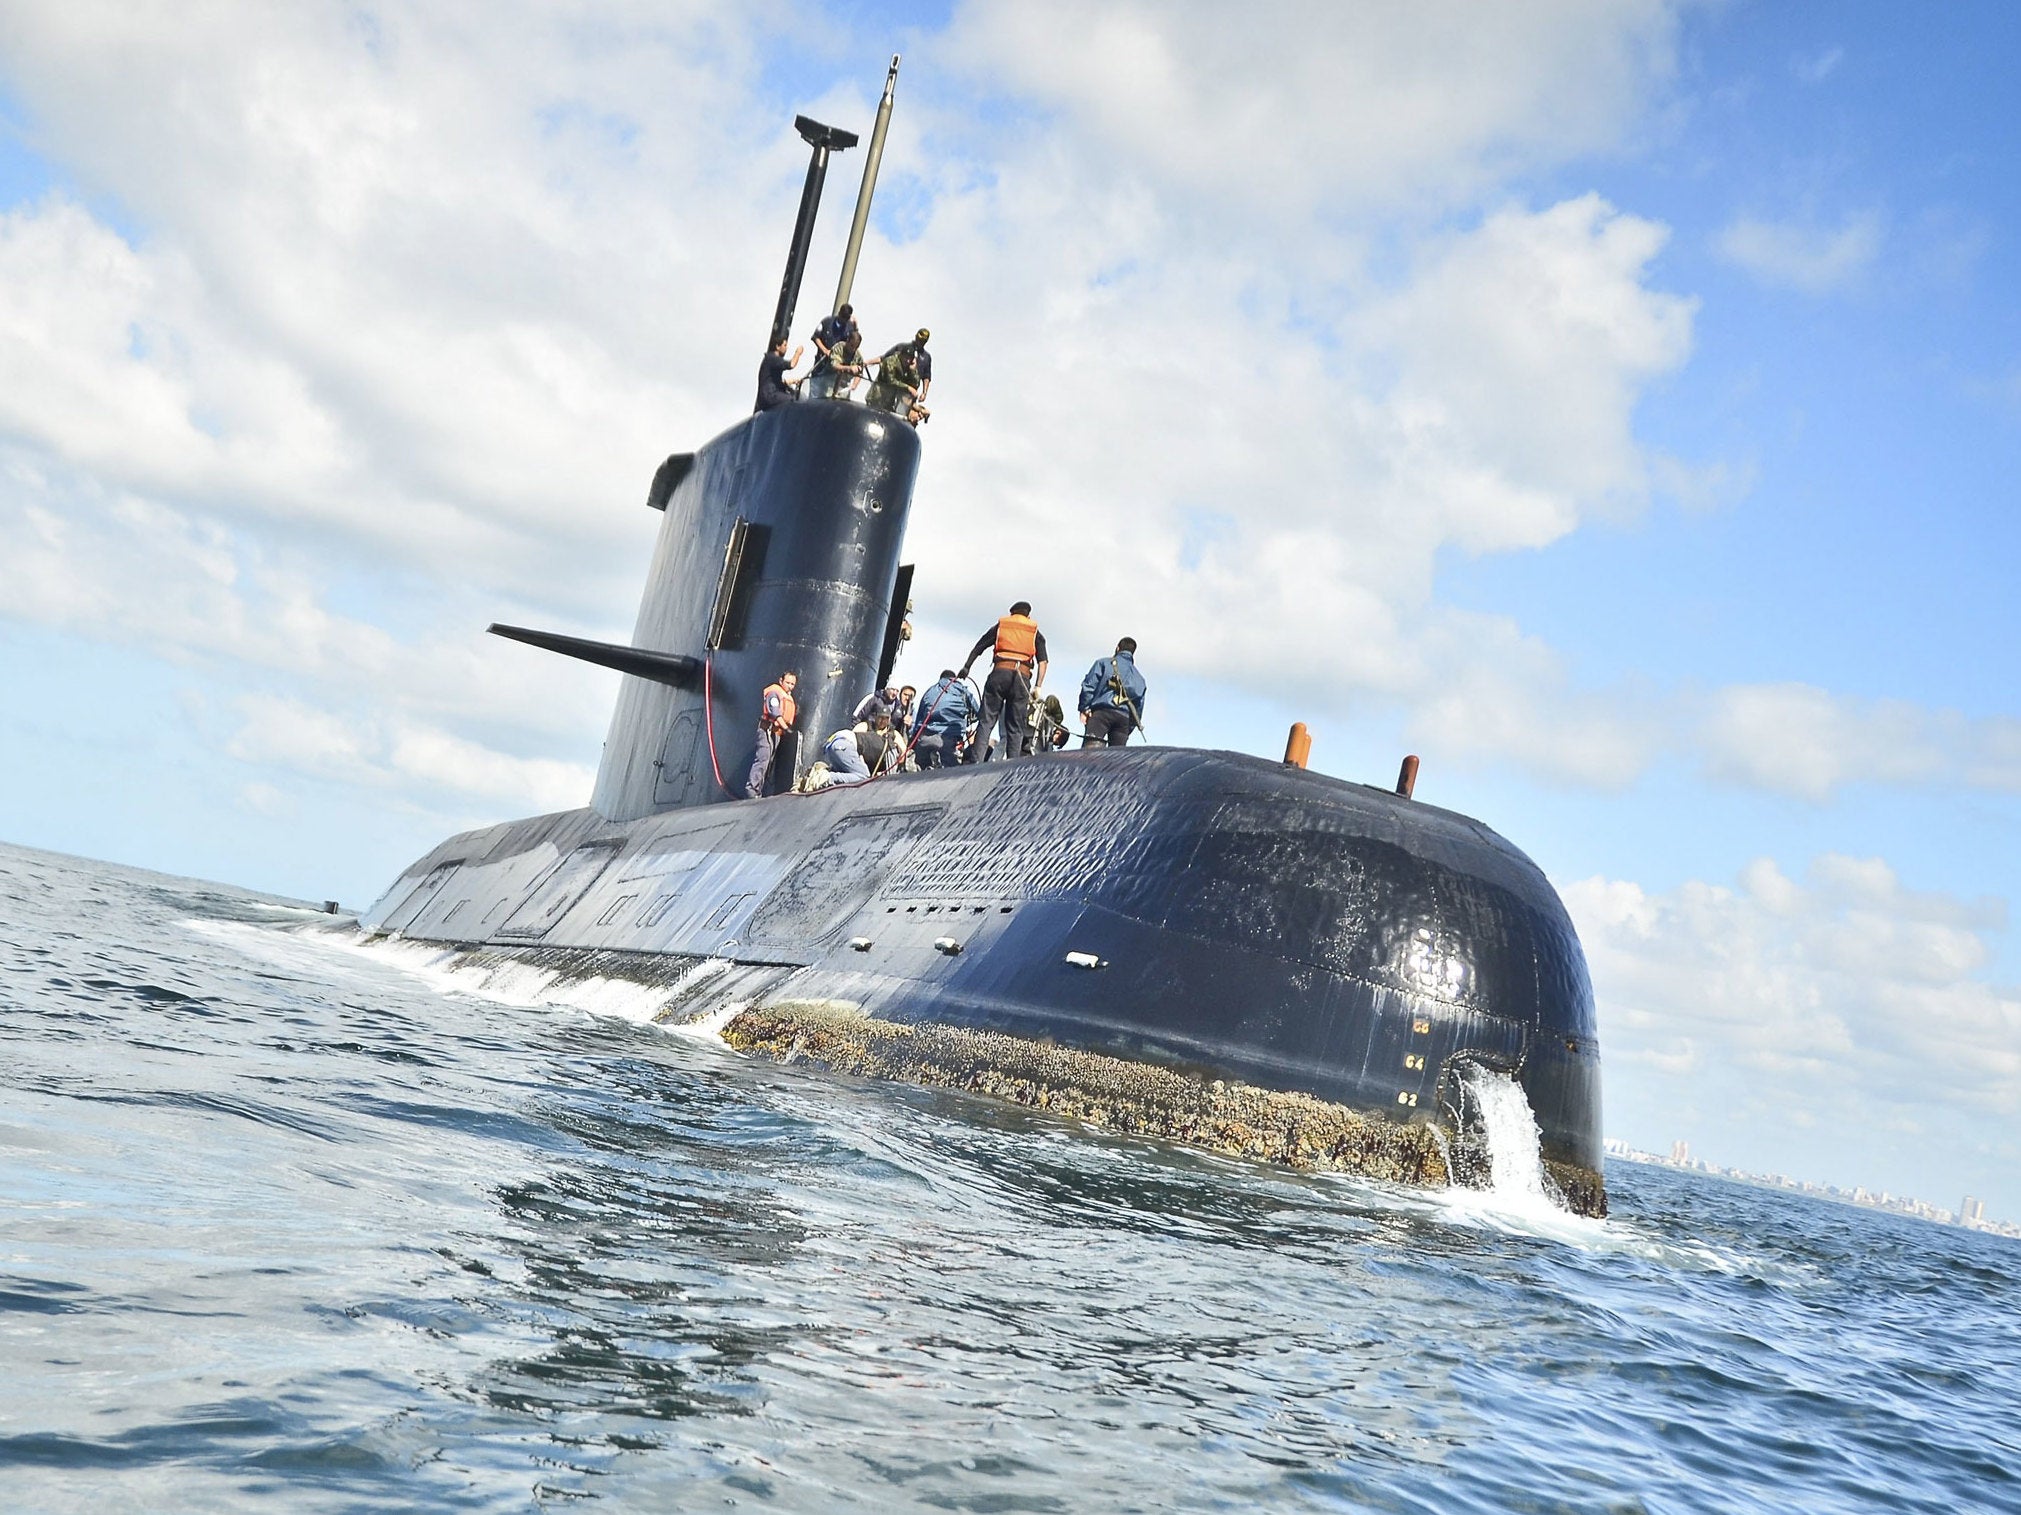 The Argentine navy said it has lost contact with the the submarine off the country's southern coast